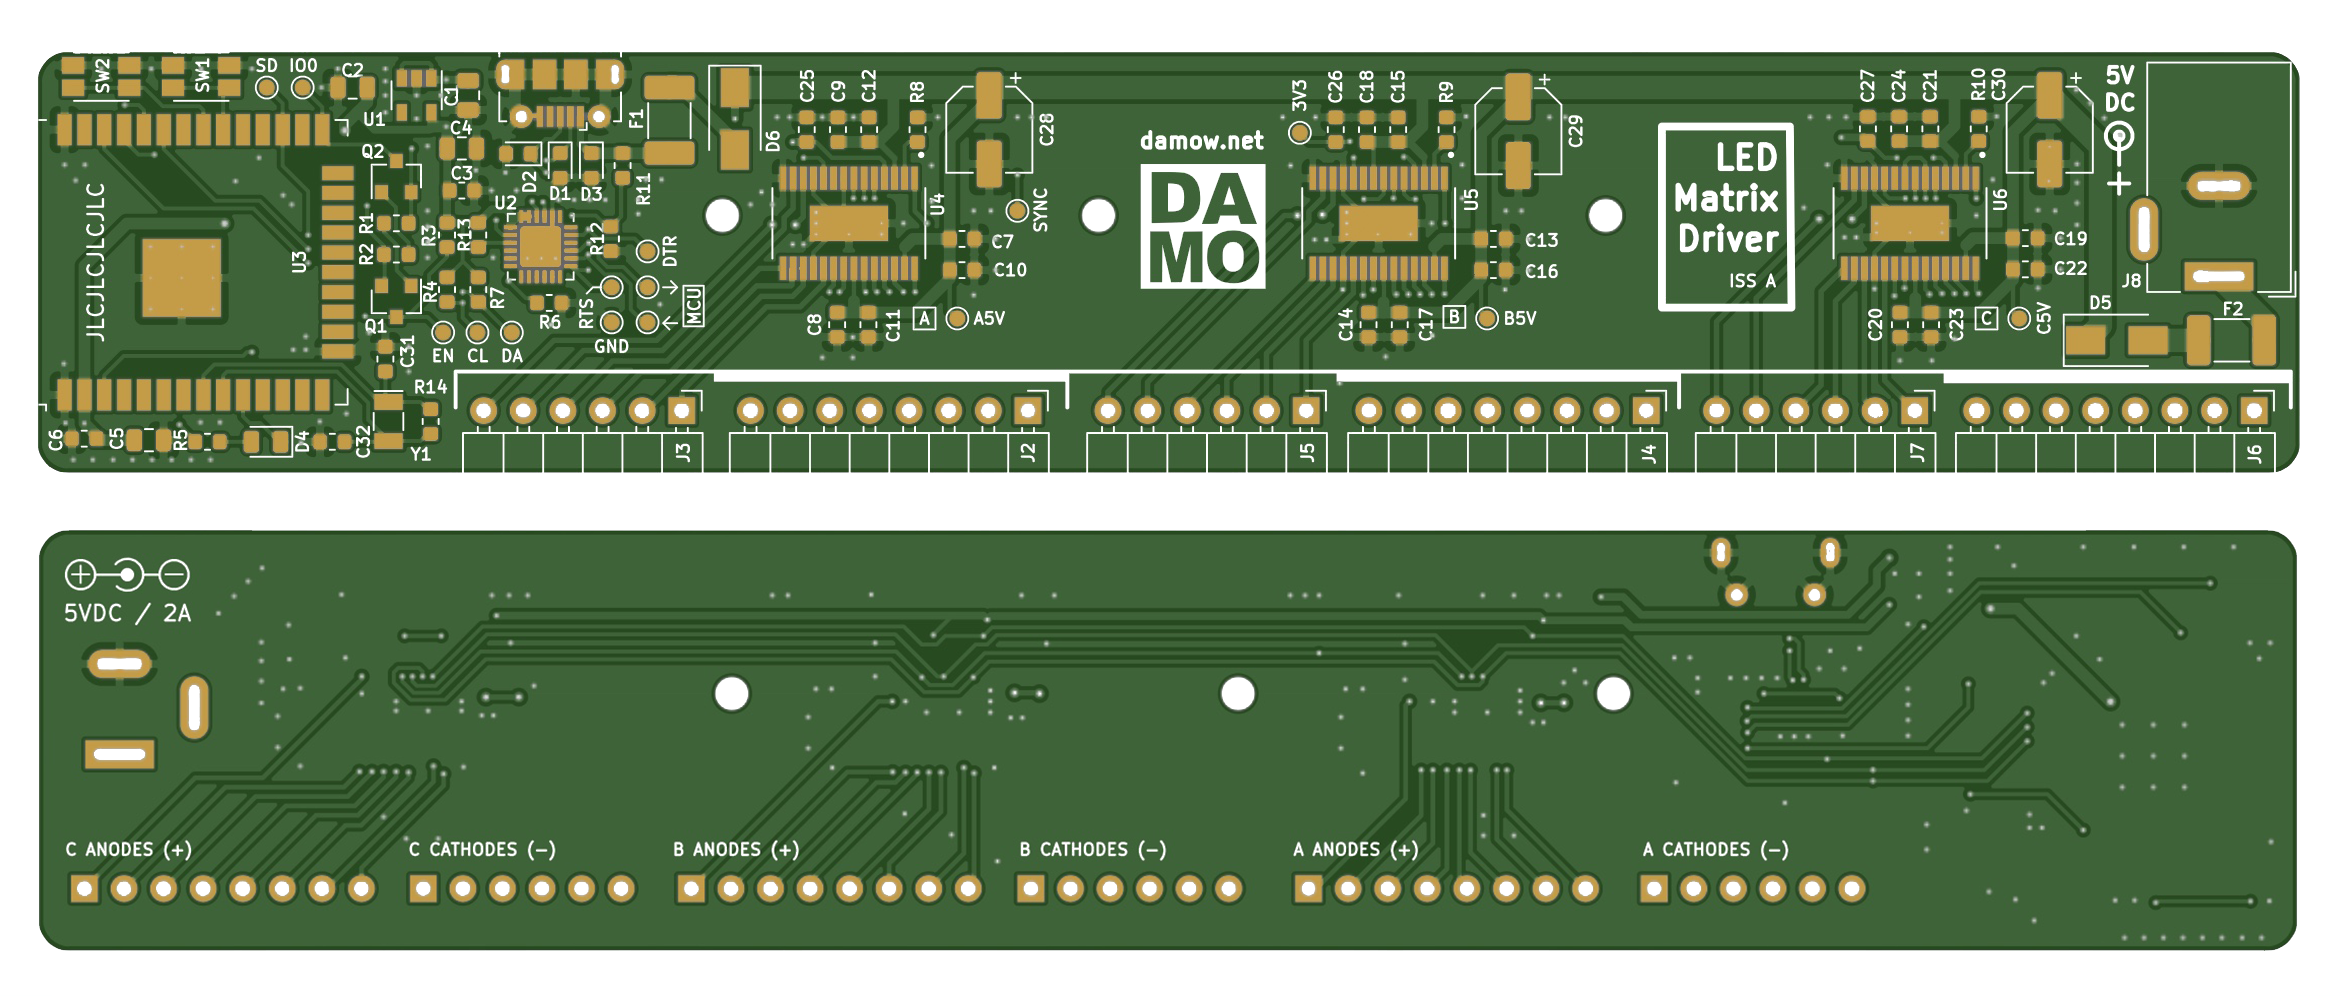 Finished Gerbers of the PCB layout